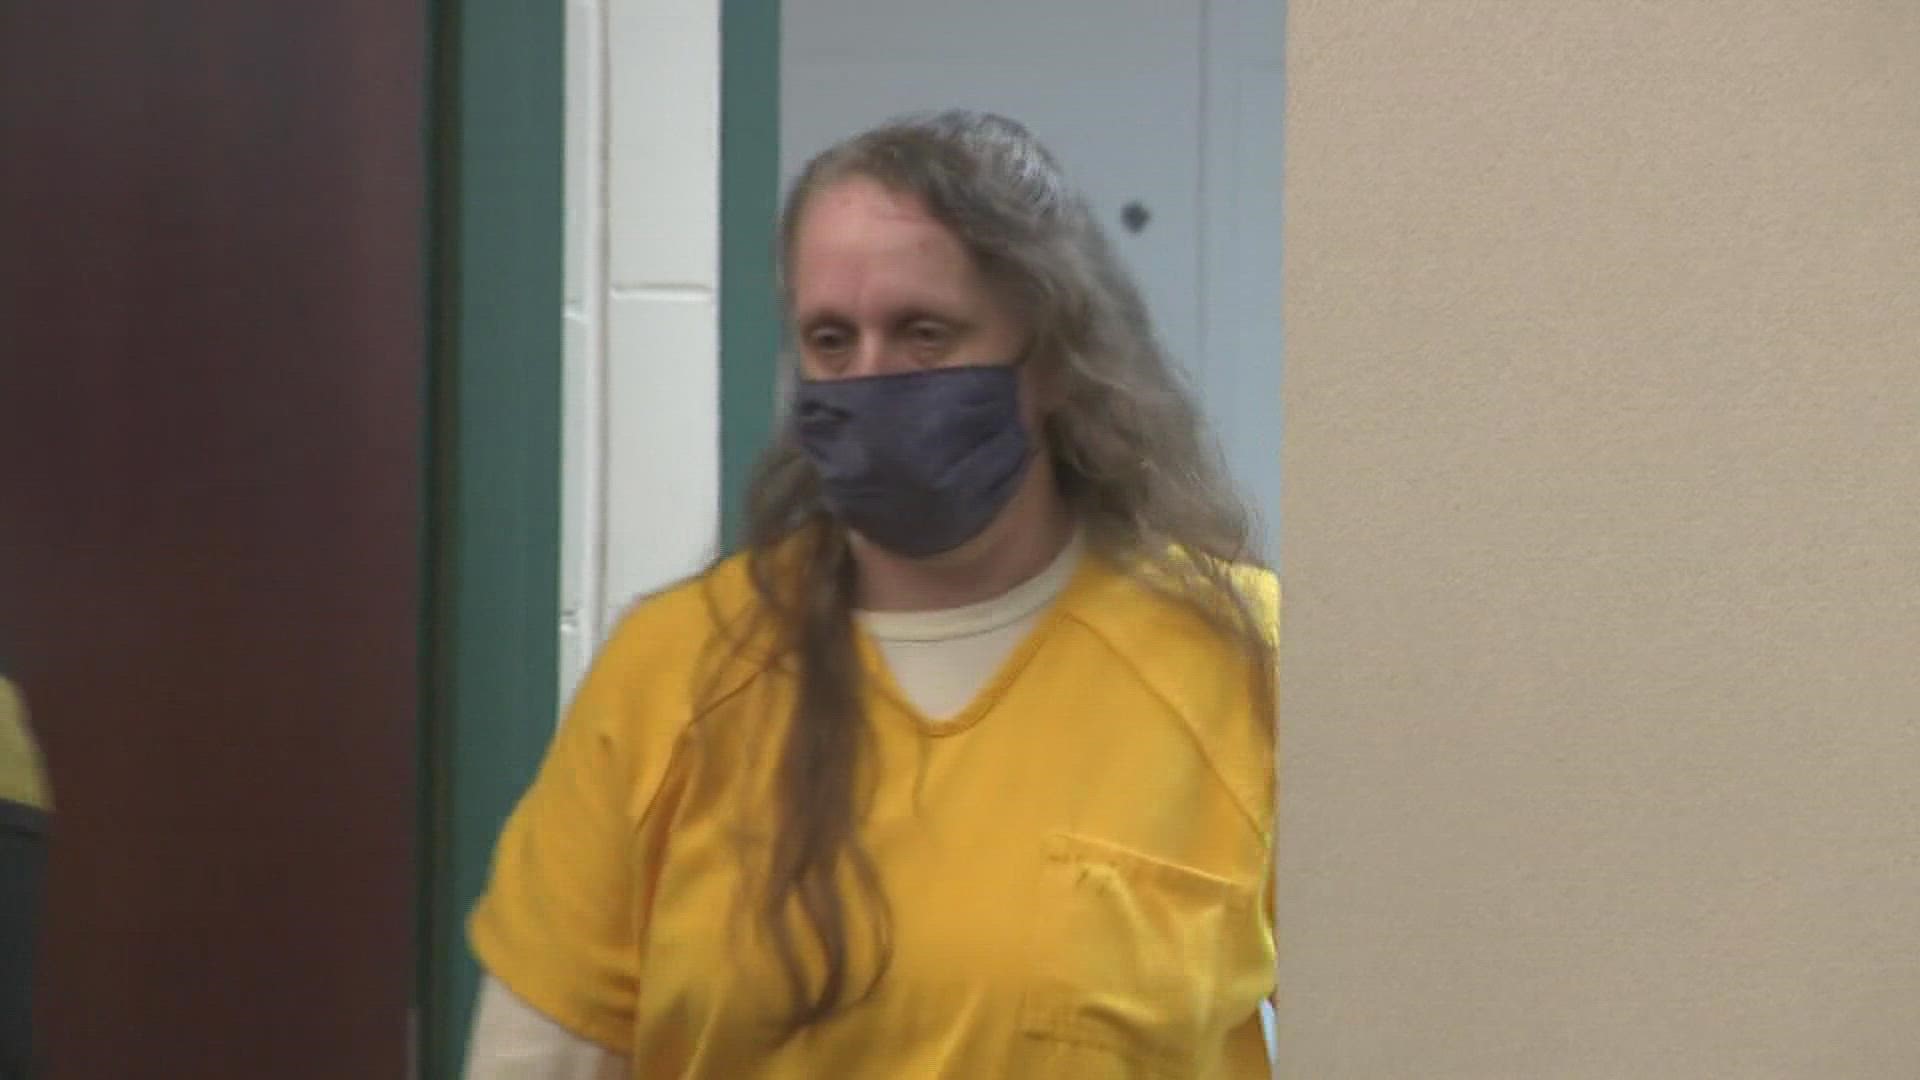 Angela Siebke pleaded guilty to endangering the life of a child resulting in death.